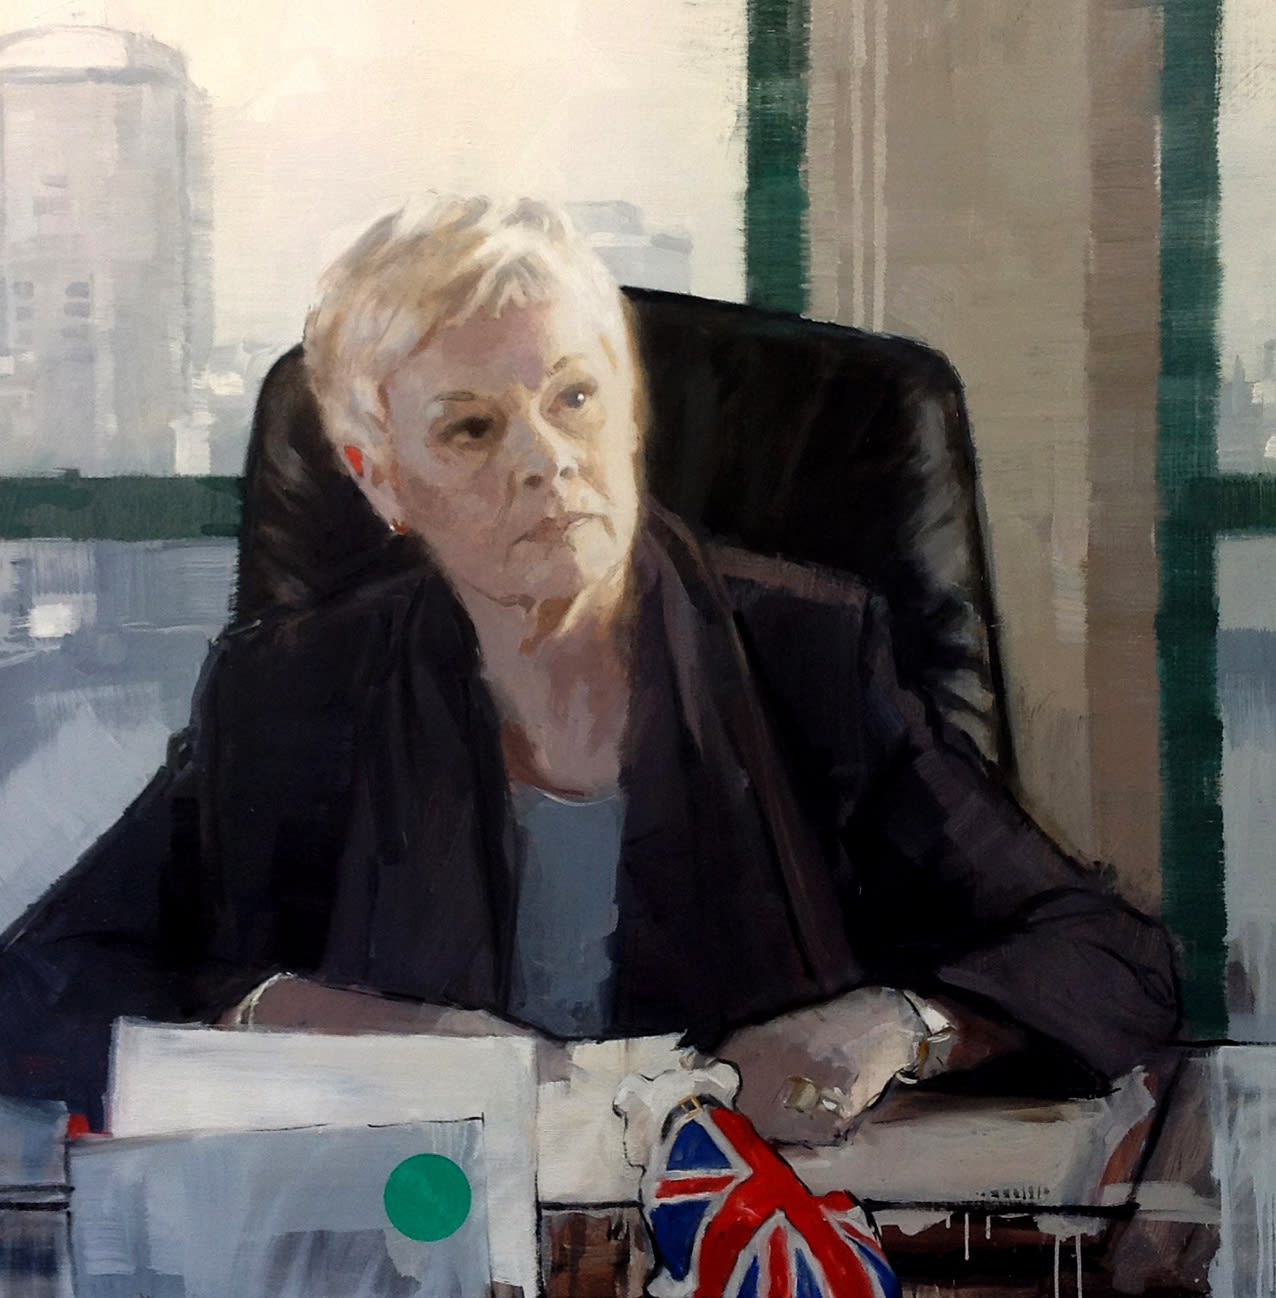 Dame Judy Dench as 'M' in Skyfall, portrait, 2013